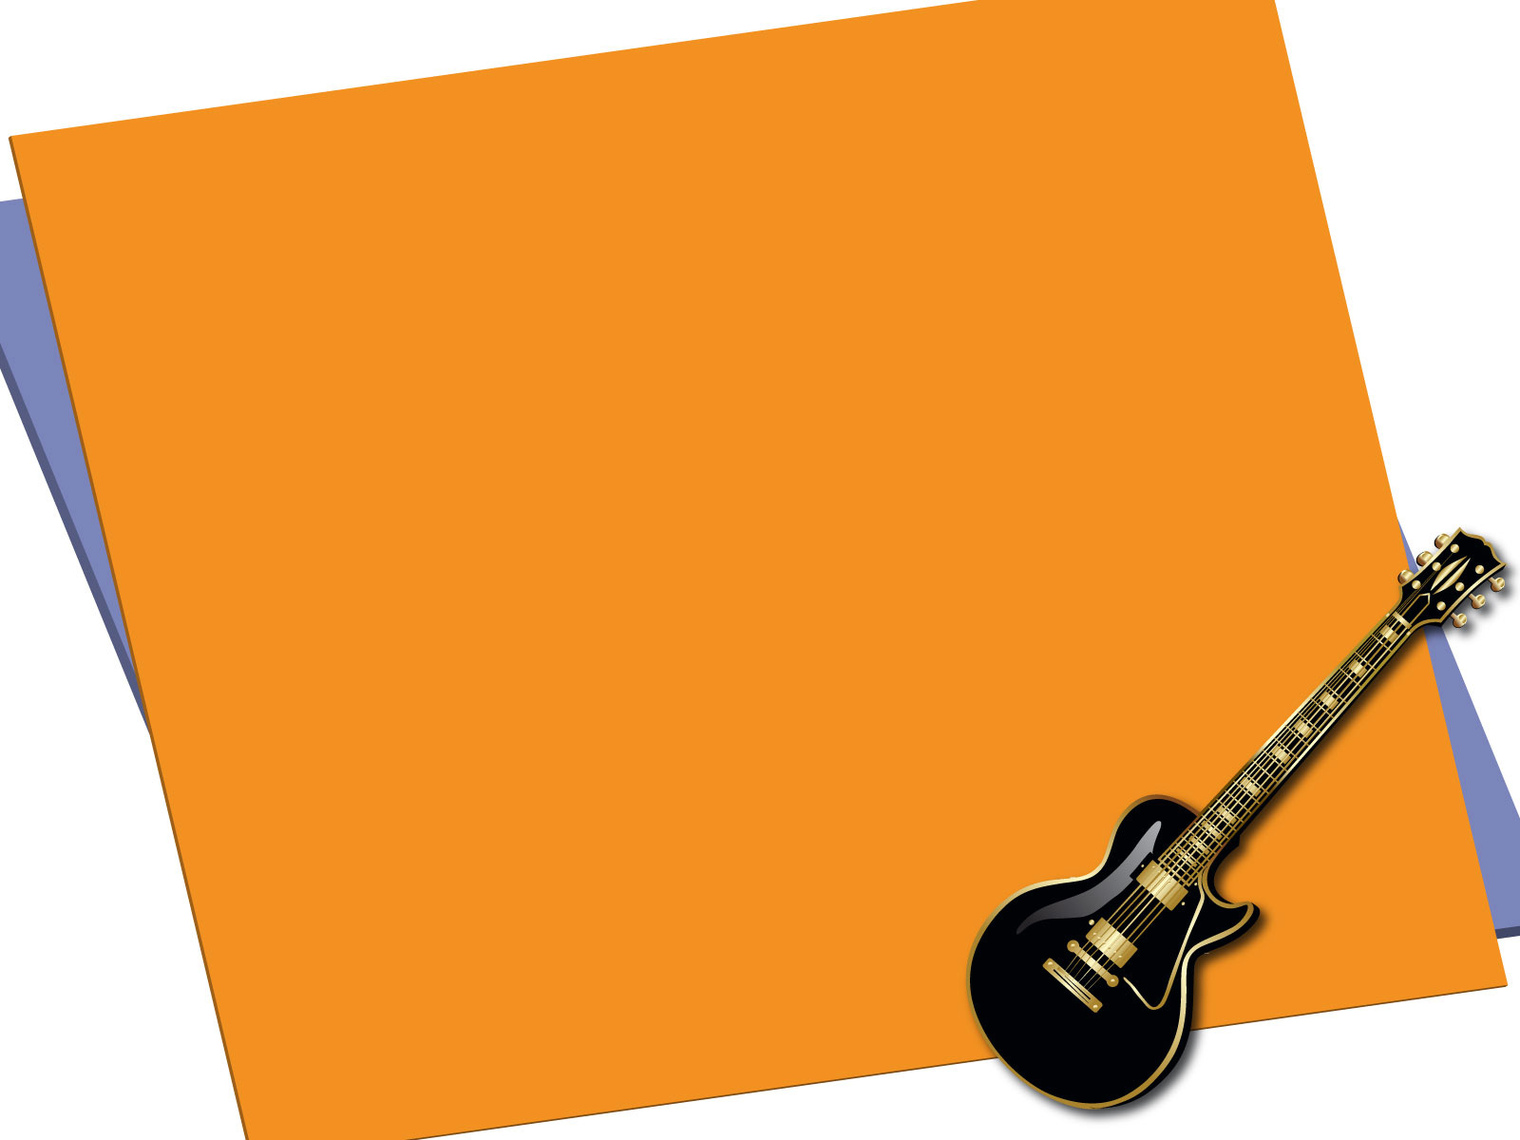 Free Guitar Backgrounds For PowerPoint Music PPT Templates Clipart ... -  ClipArt Best - ClipArt Best